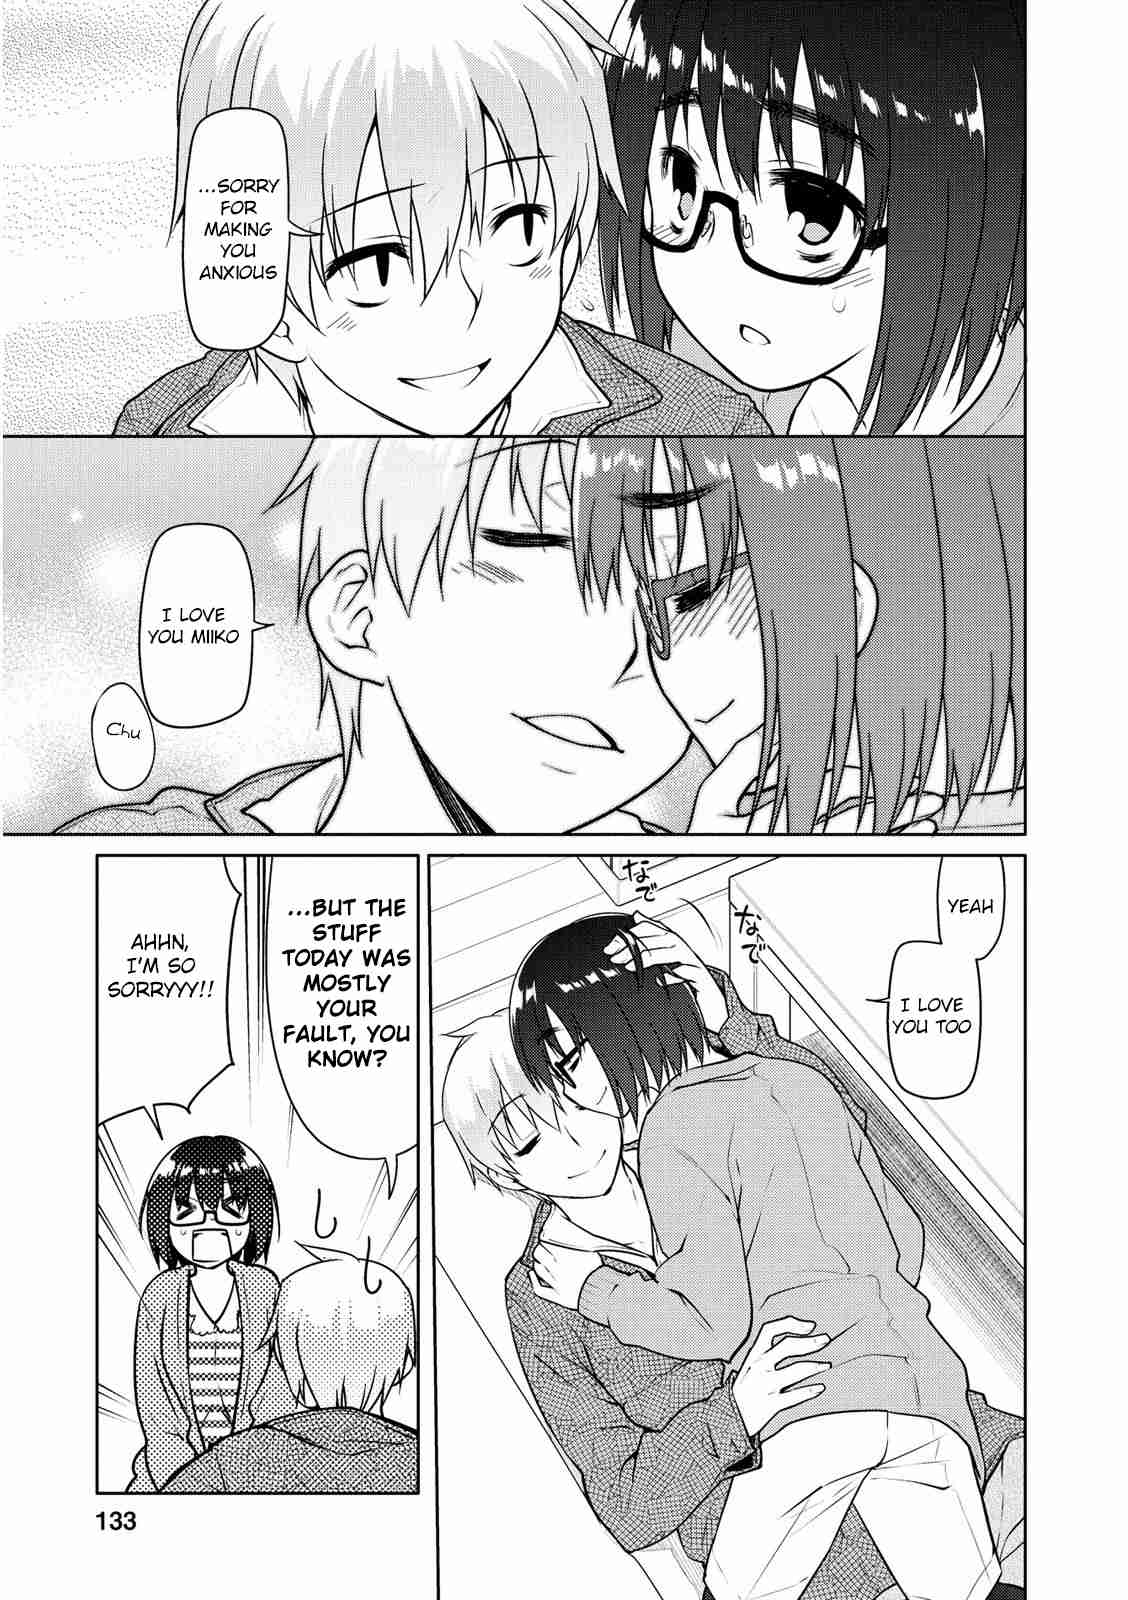 Seishun no After Vol. 1 Ch. 5 Overlap of Immorality